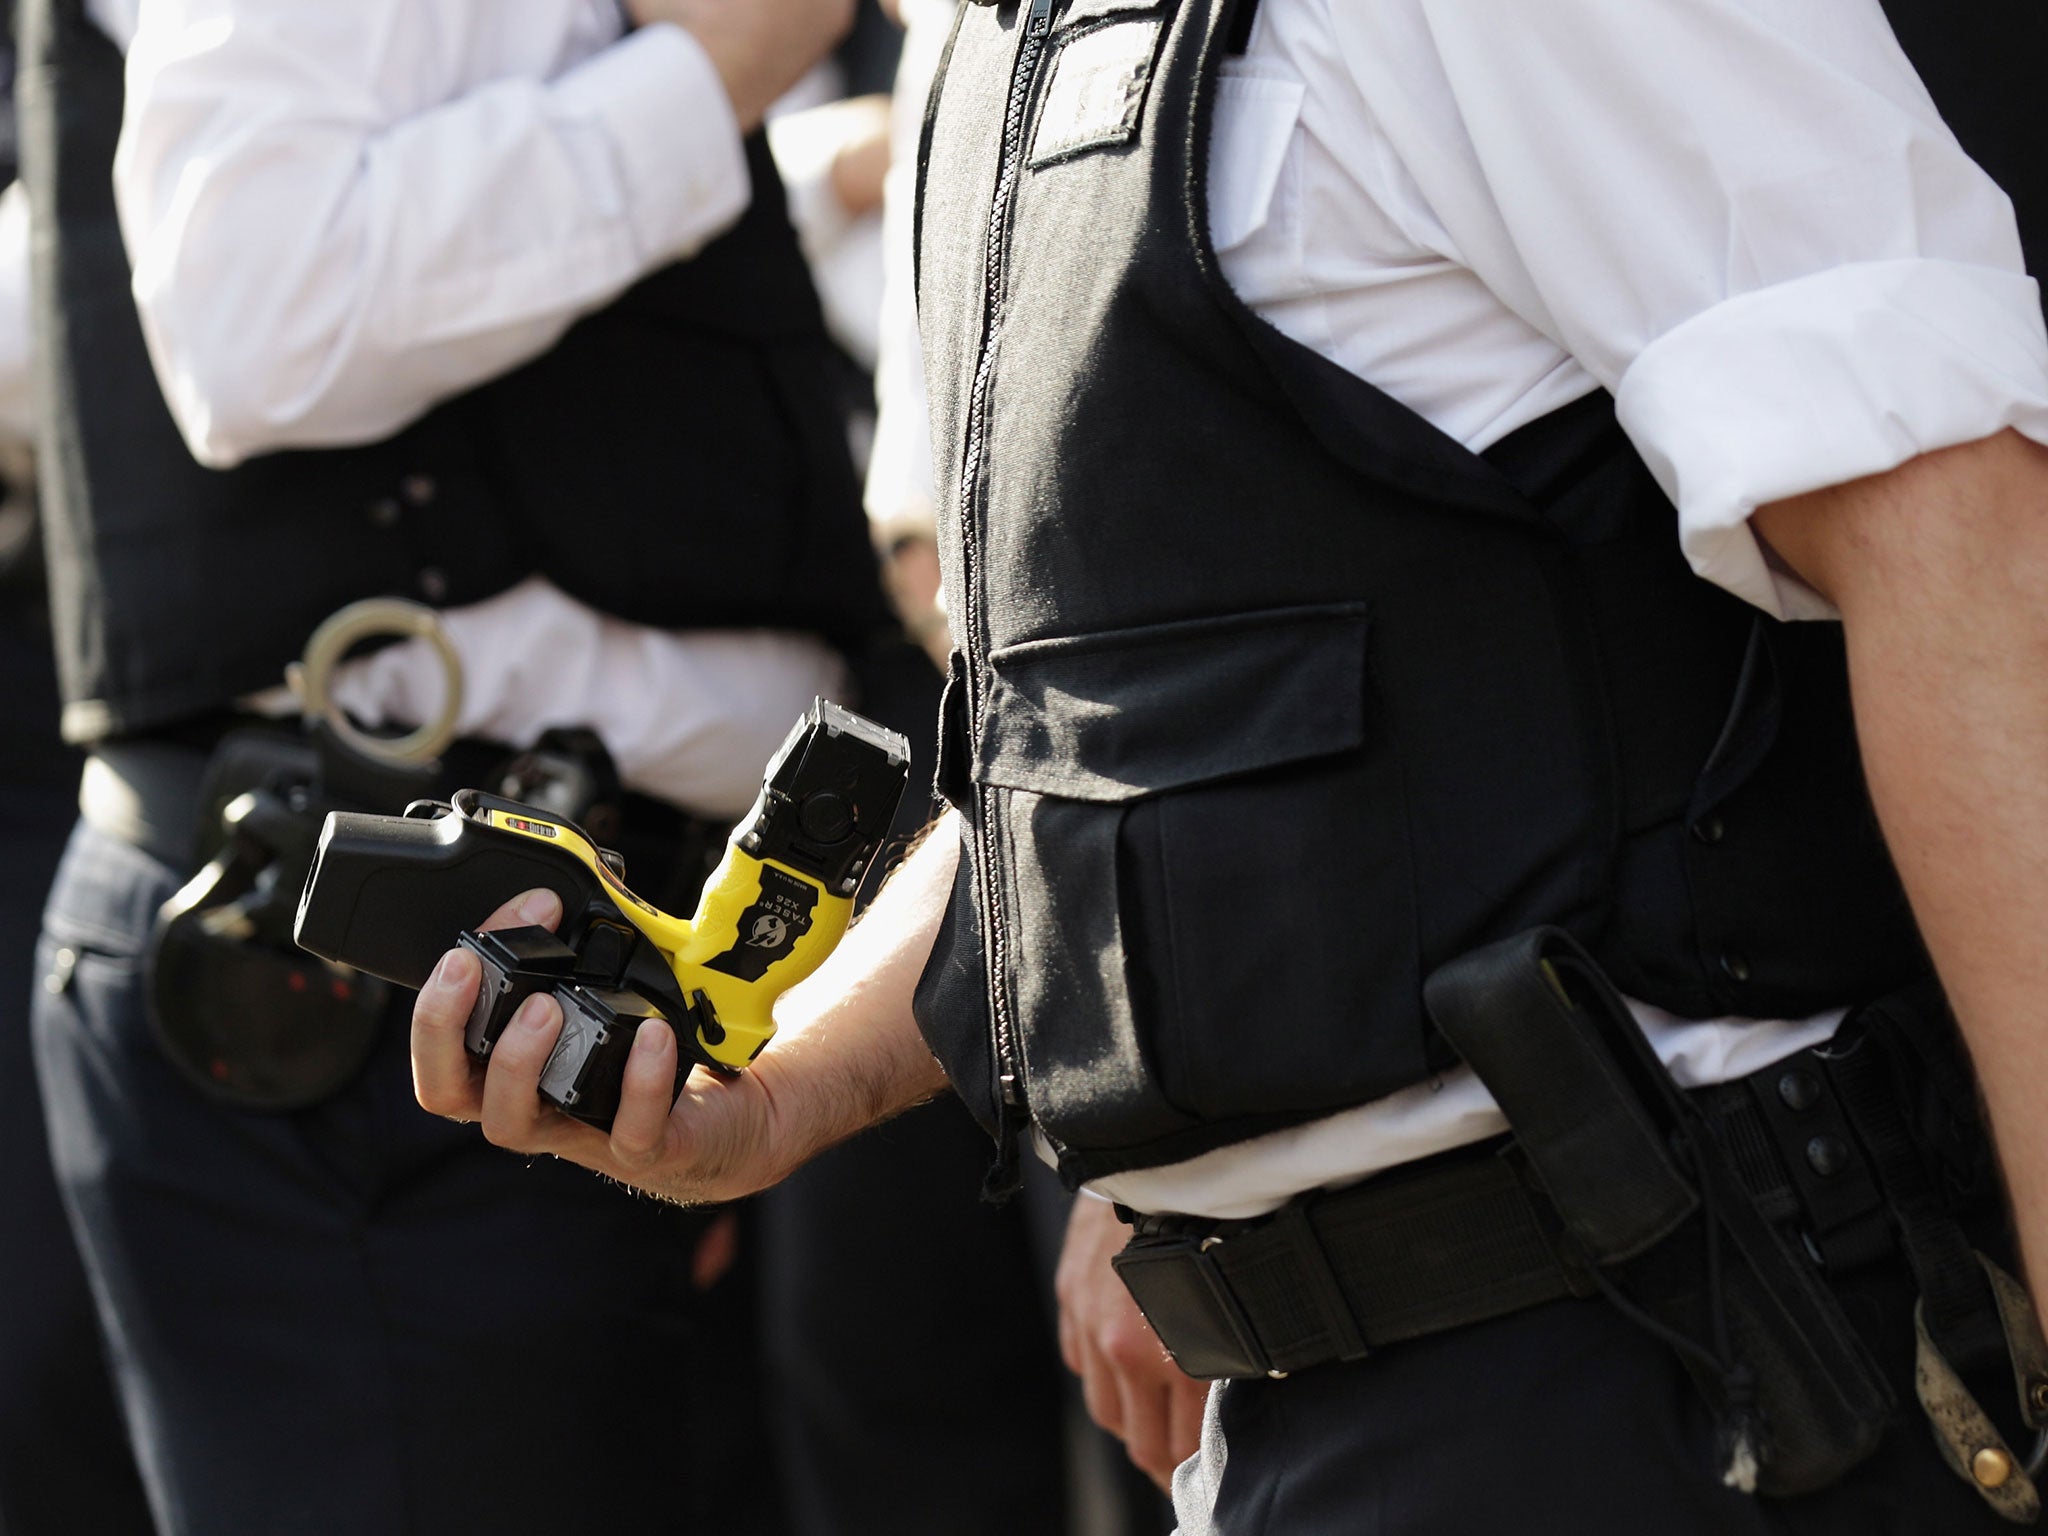 A police officer removes a TASER weapon from a colleague (Getty)